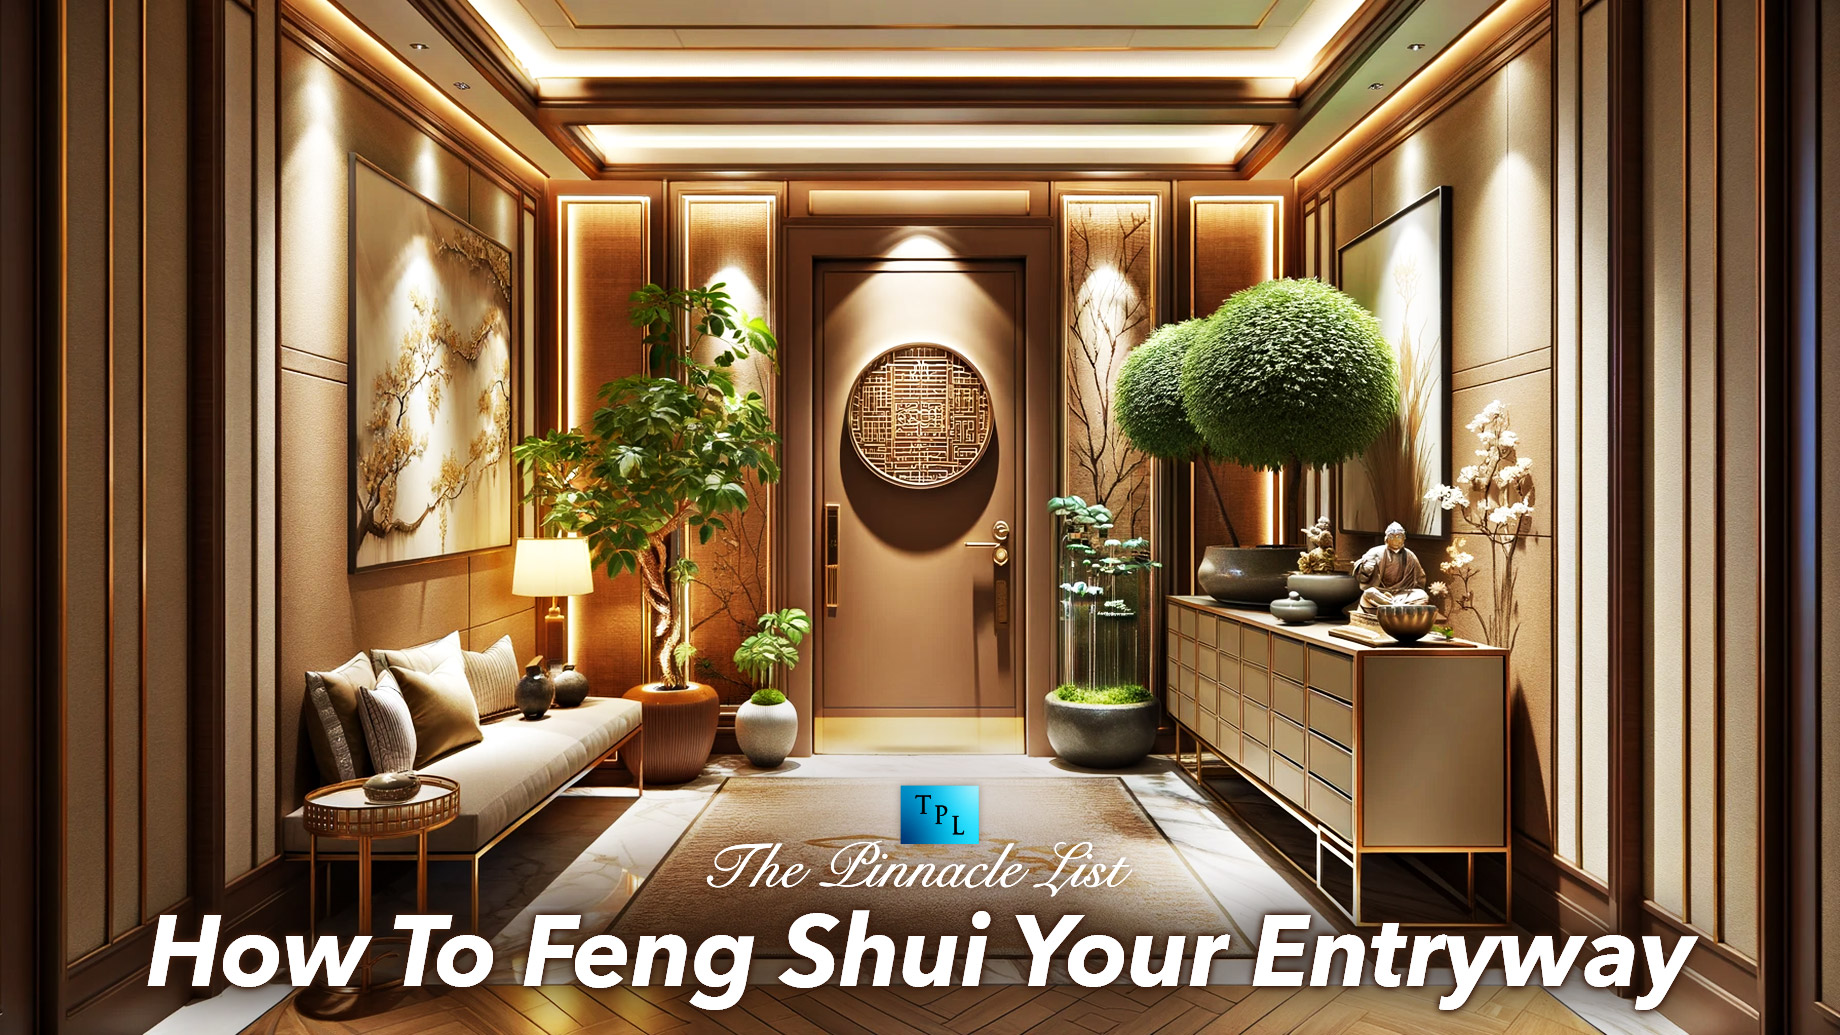 How To Feng Shui Your Entryway